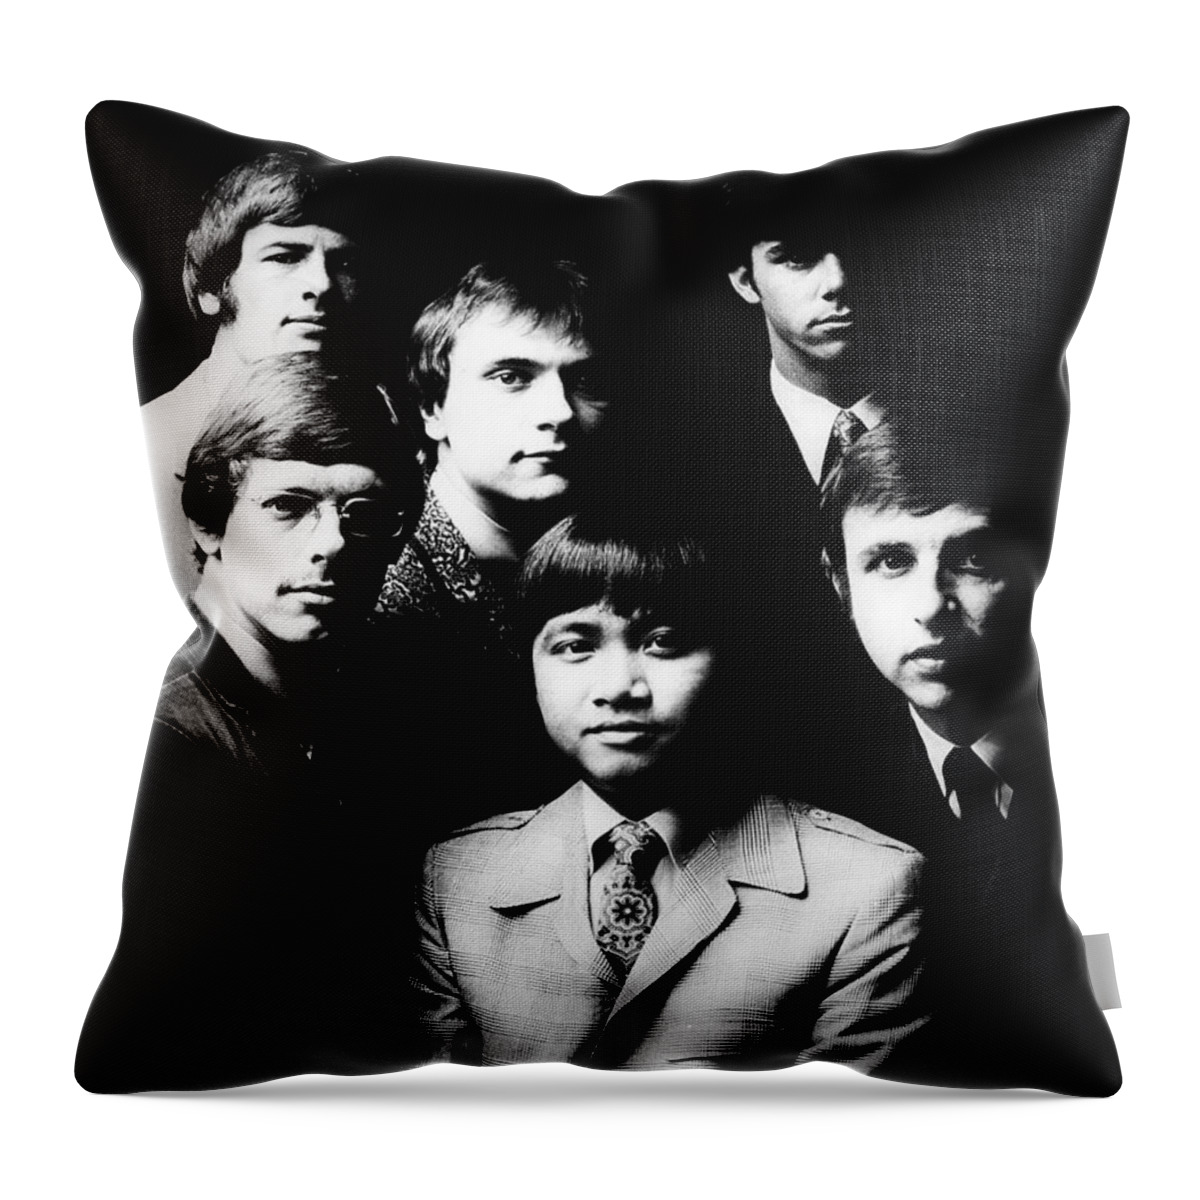 Publicity Photo Throw Pillow featuring the photograph The Association 1968 by Mountain Dreams